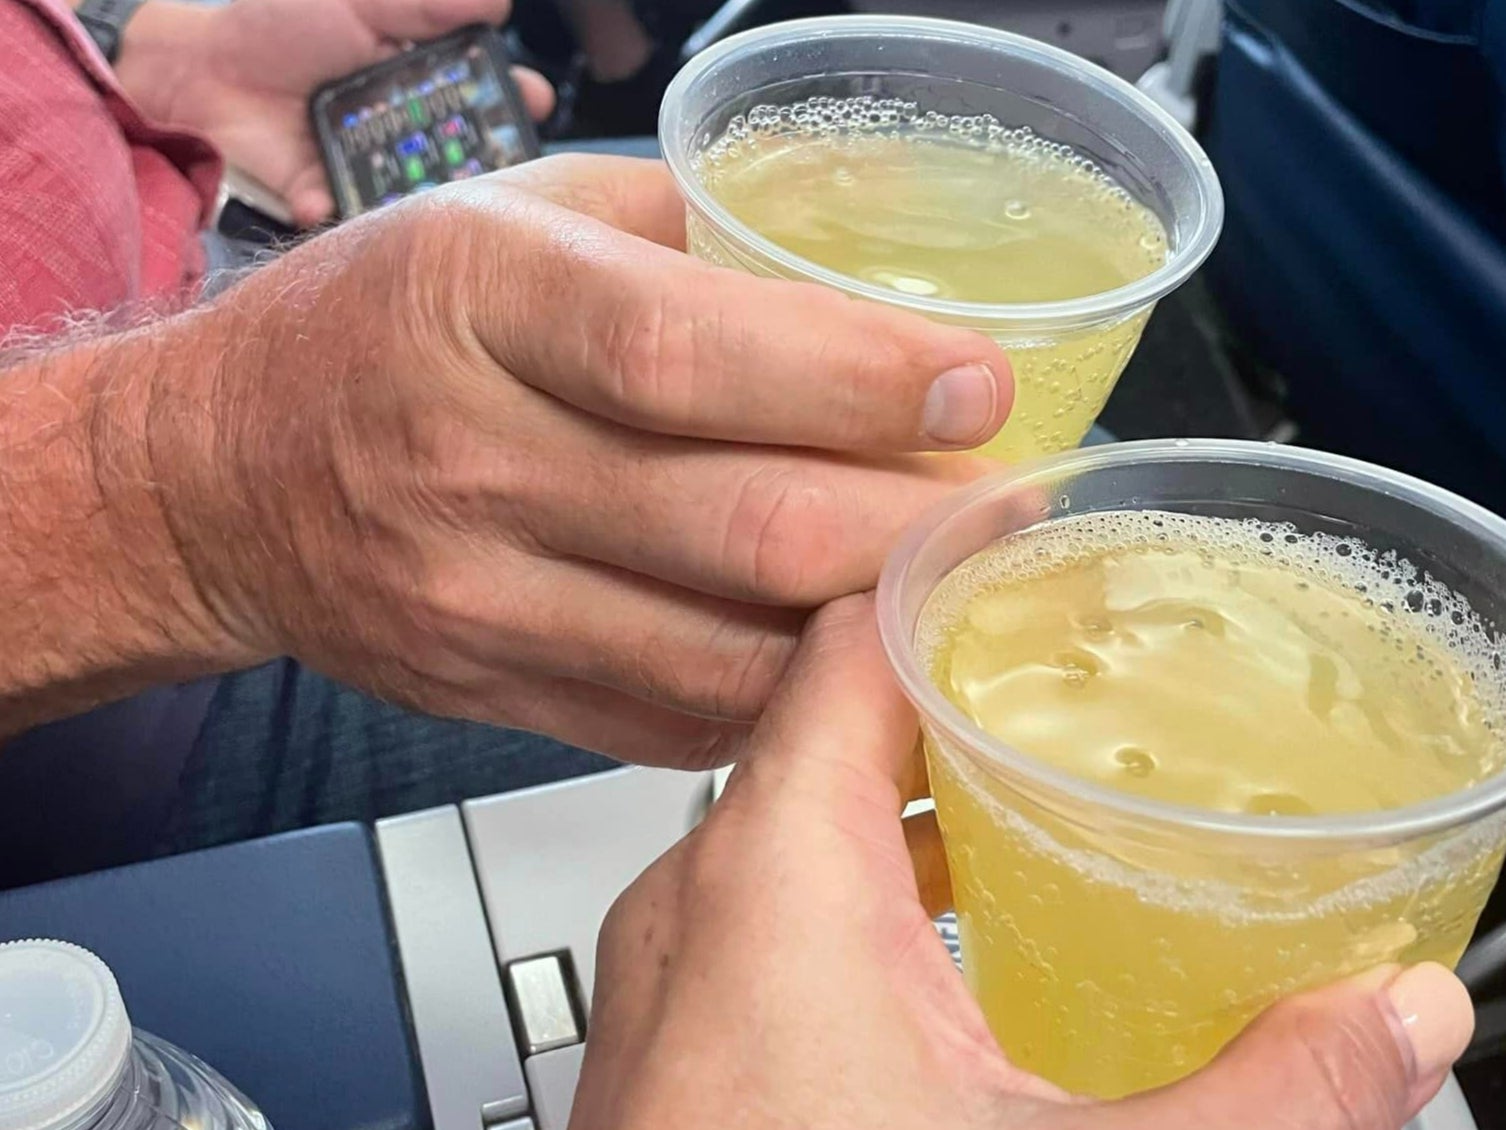 Free alcoholic drinks in first class are wasted on children